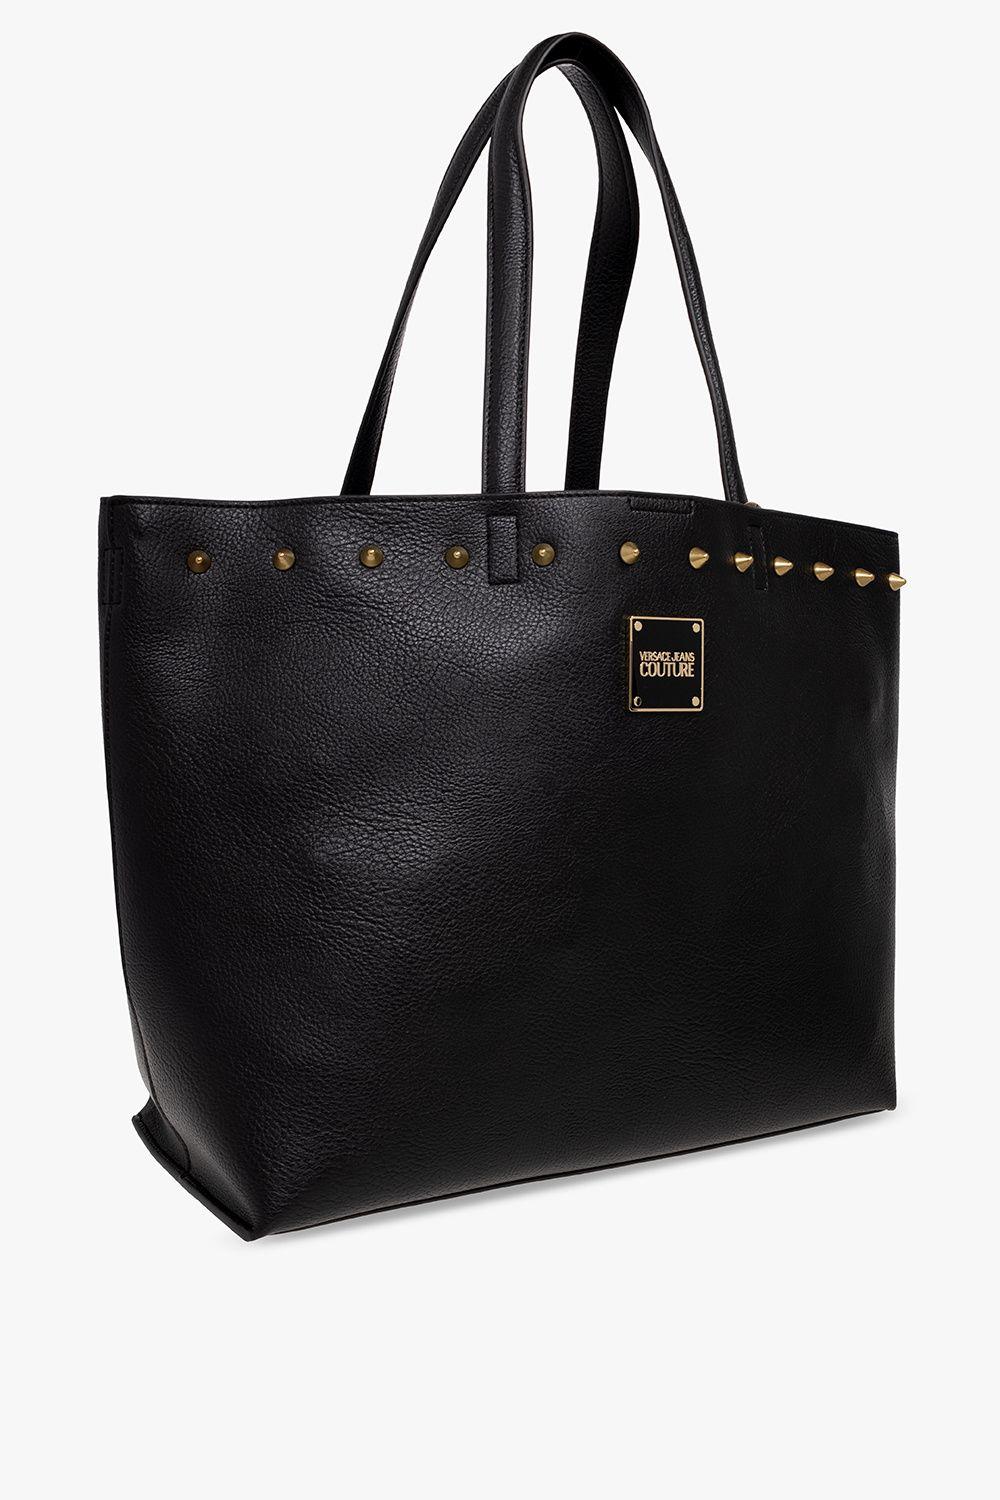 Versace Jeans Couture Shopper Bag in Black | Lyst